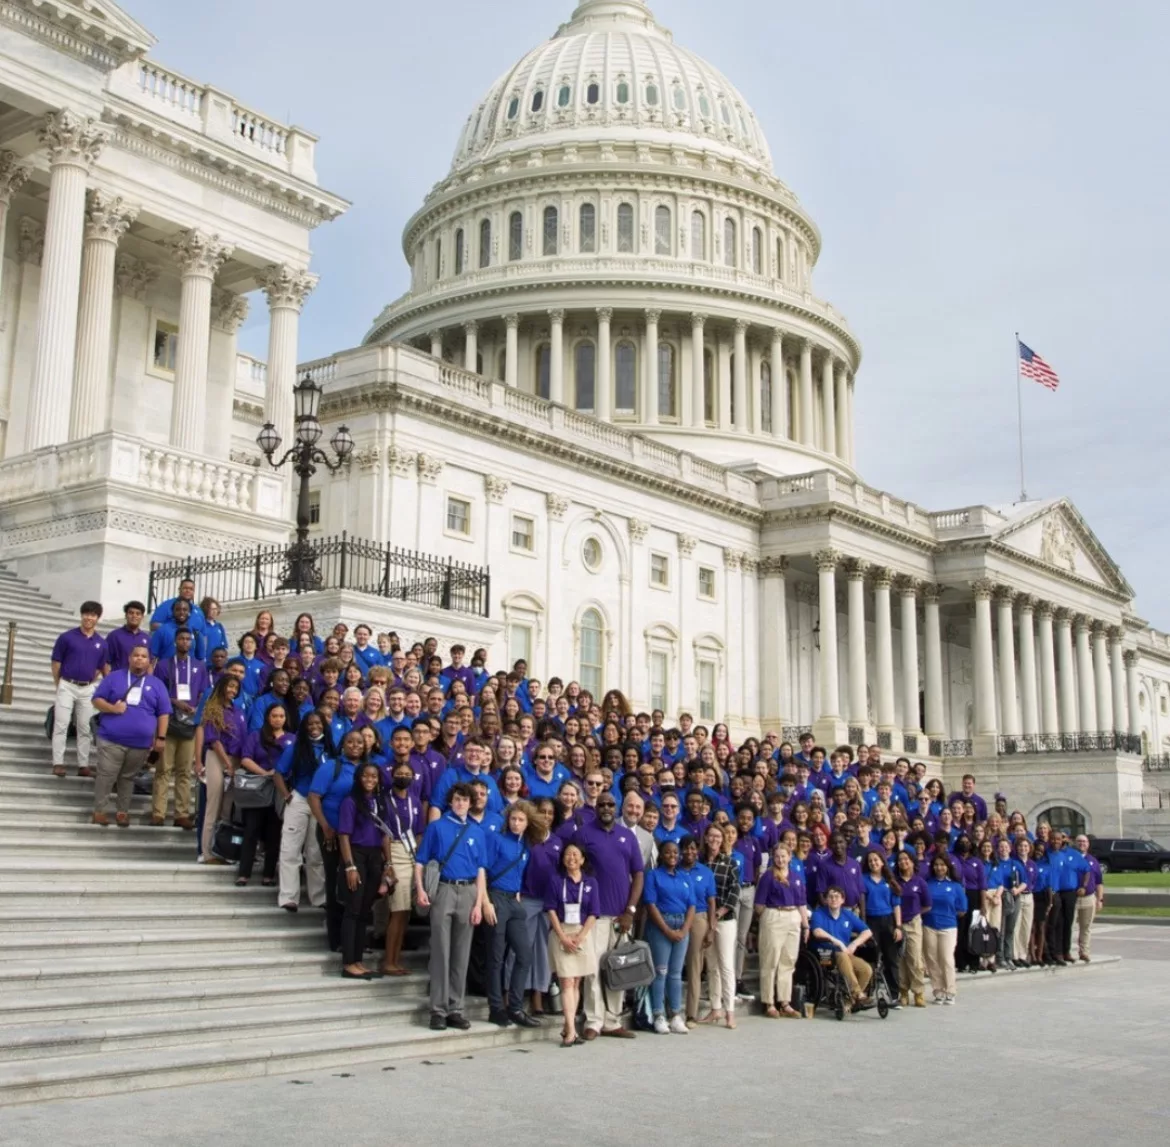 A diverse group of individuals dressed in blue posing for a photo in front of a white building